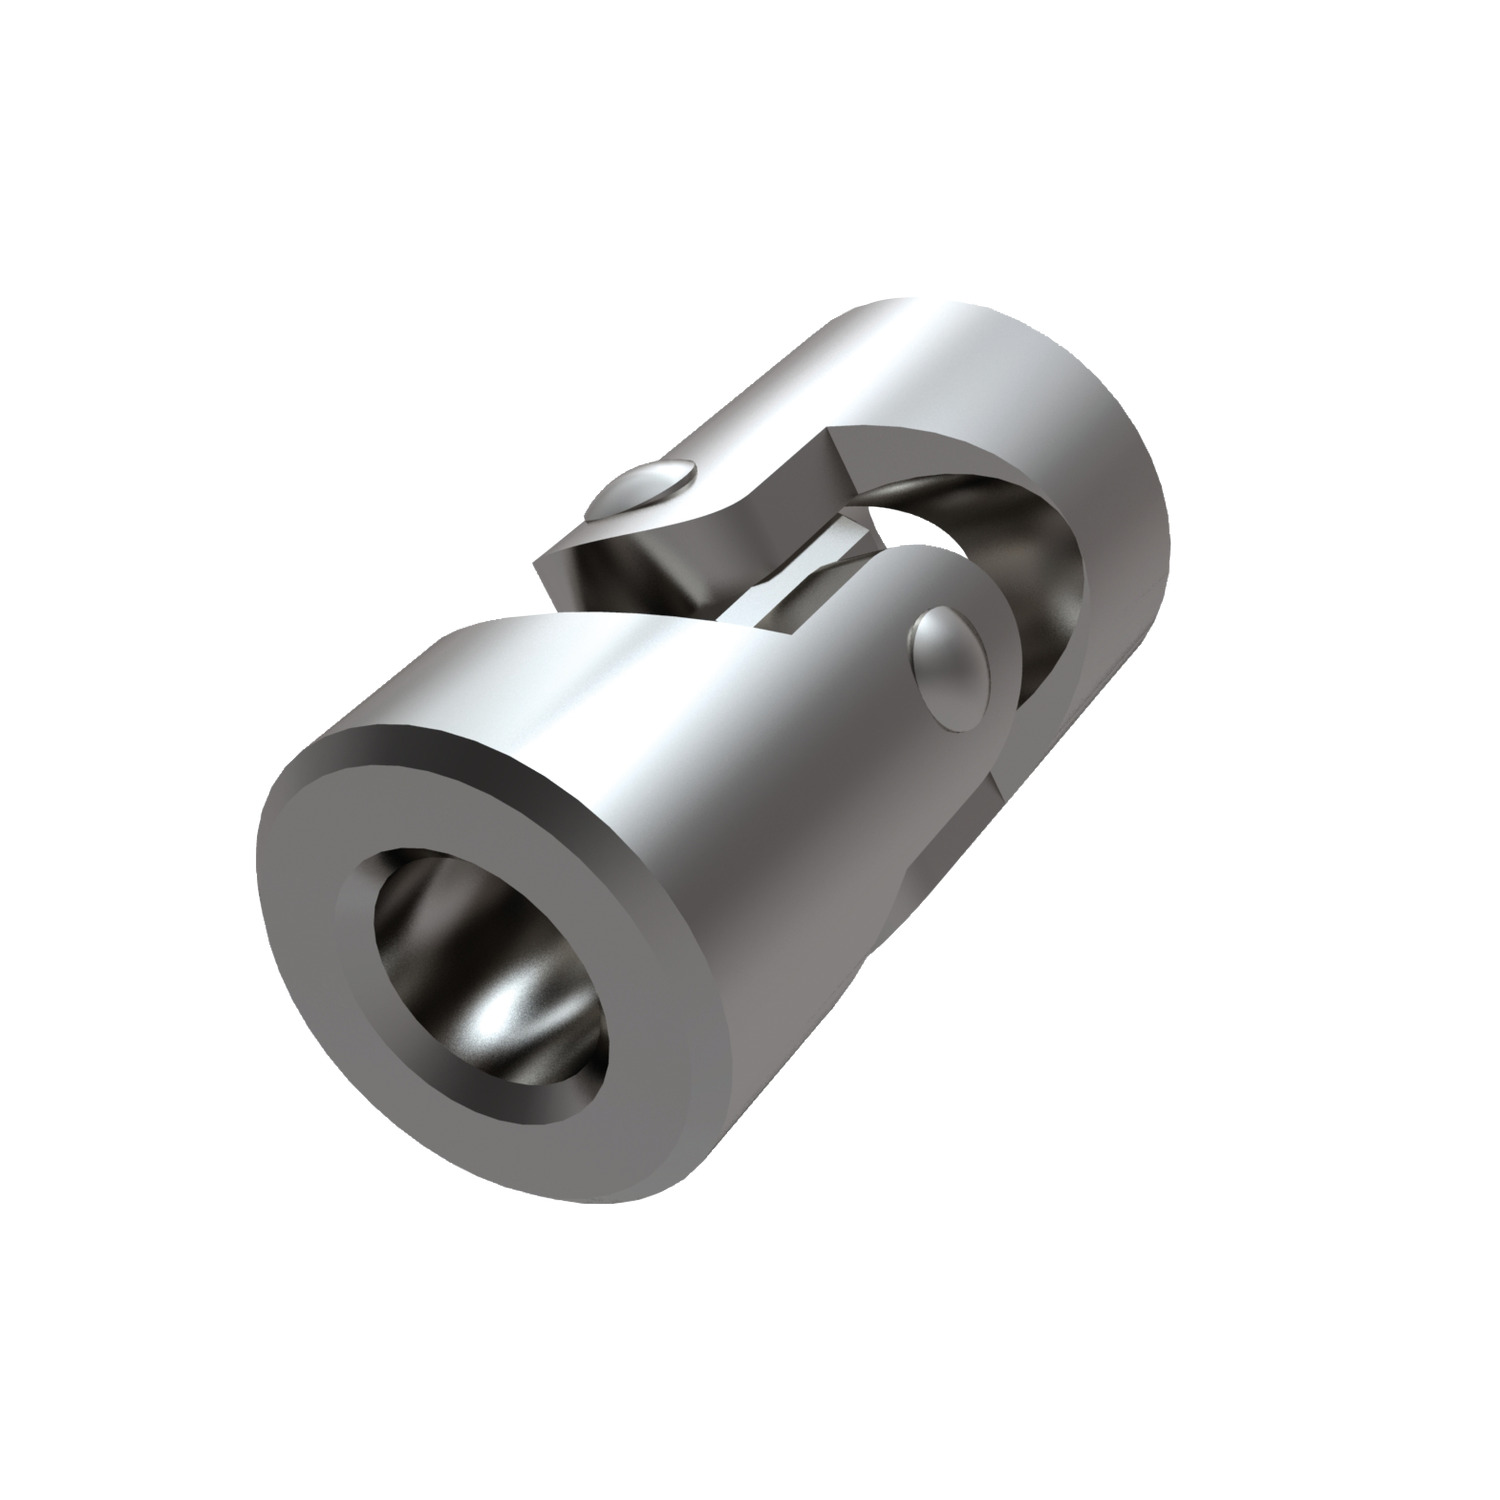 Stainless Single Universal Joint Stainless steel single universal joints manufactured to DIN 808. Maximum bending angle of 45° per joint.